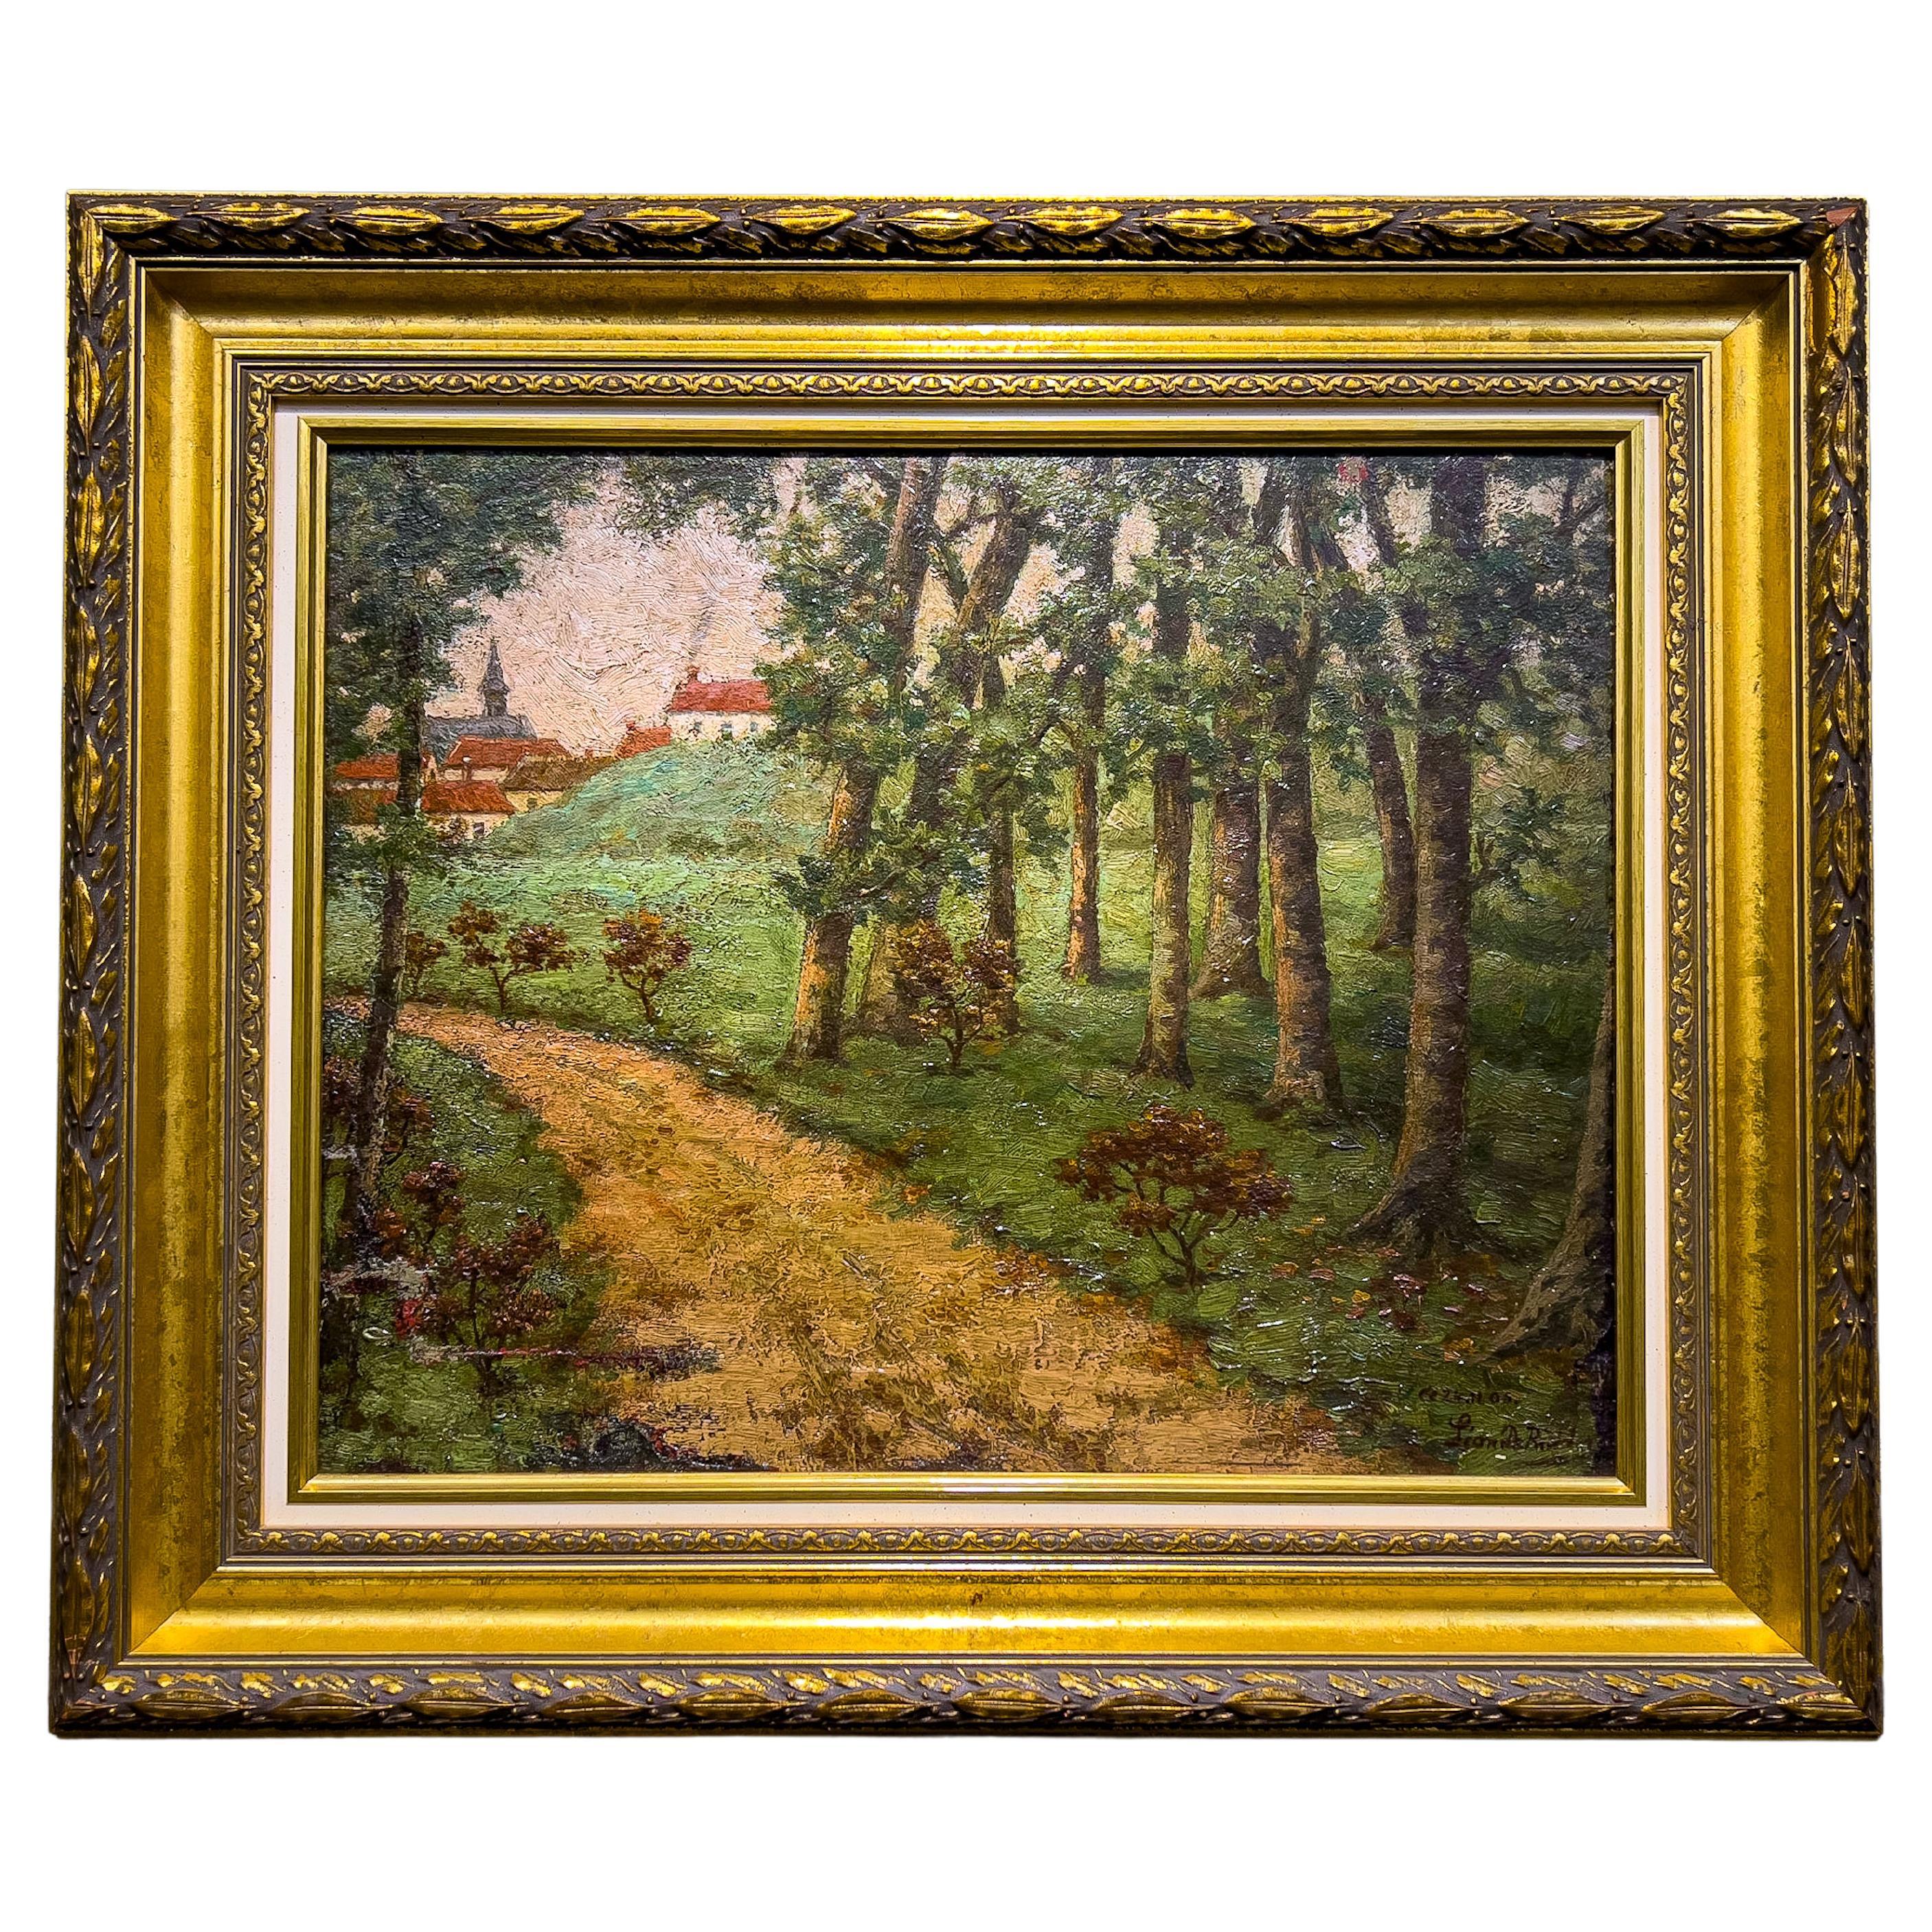 1920's Oil Painting on Board of Landscape